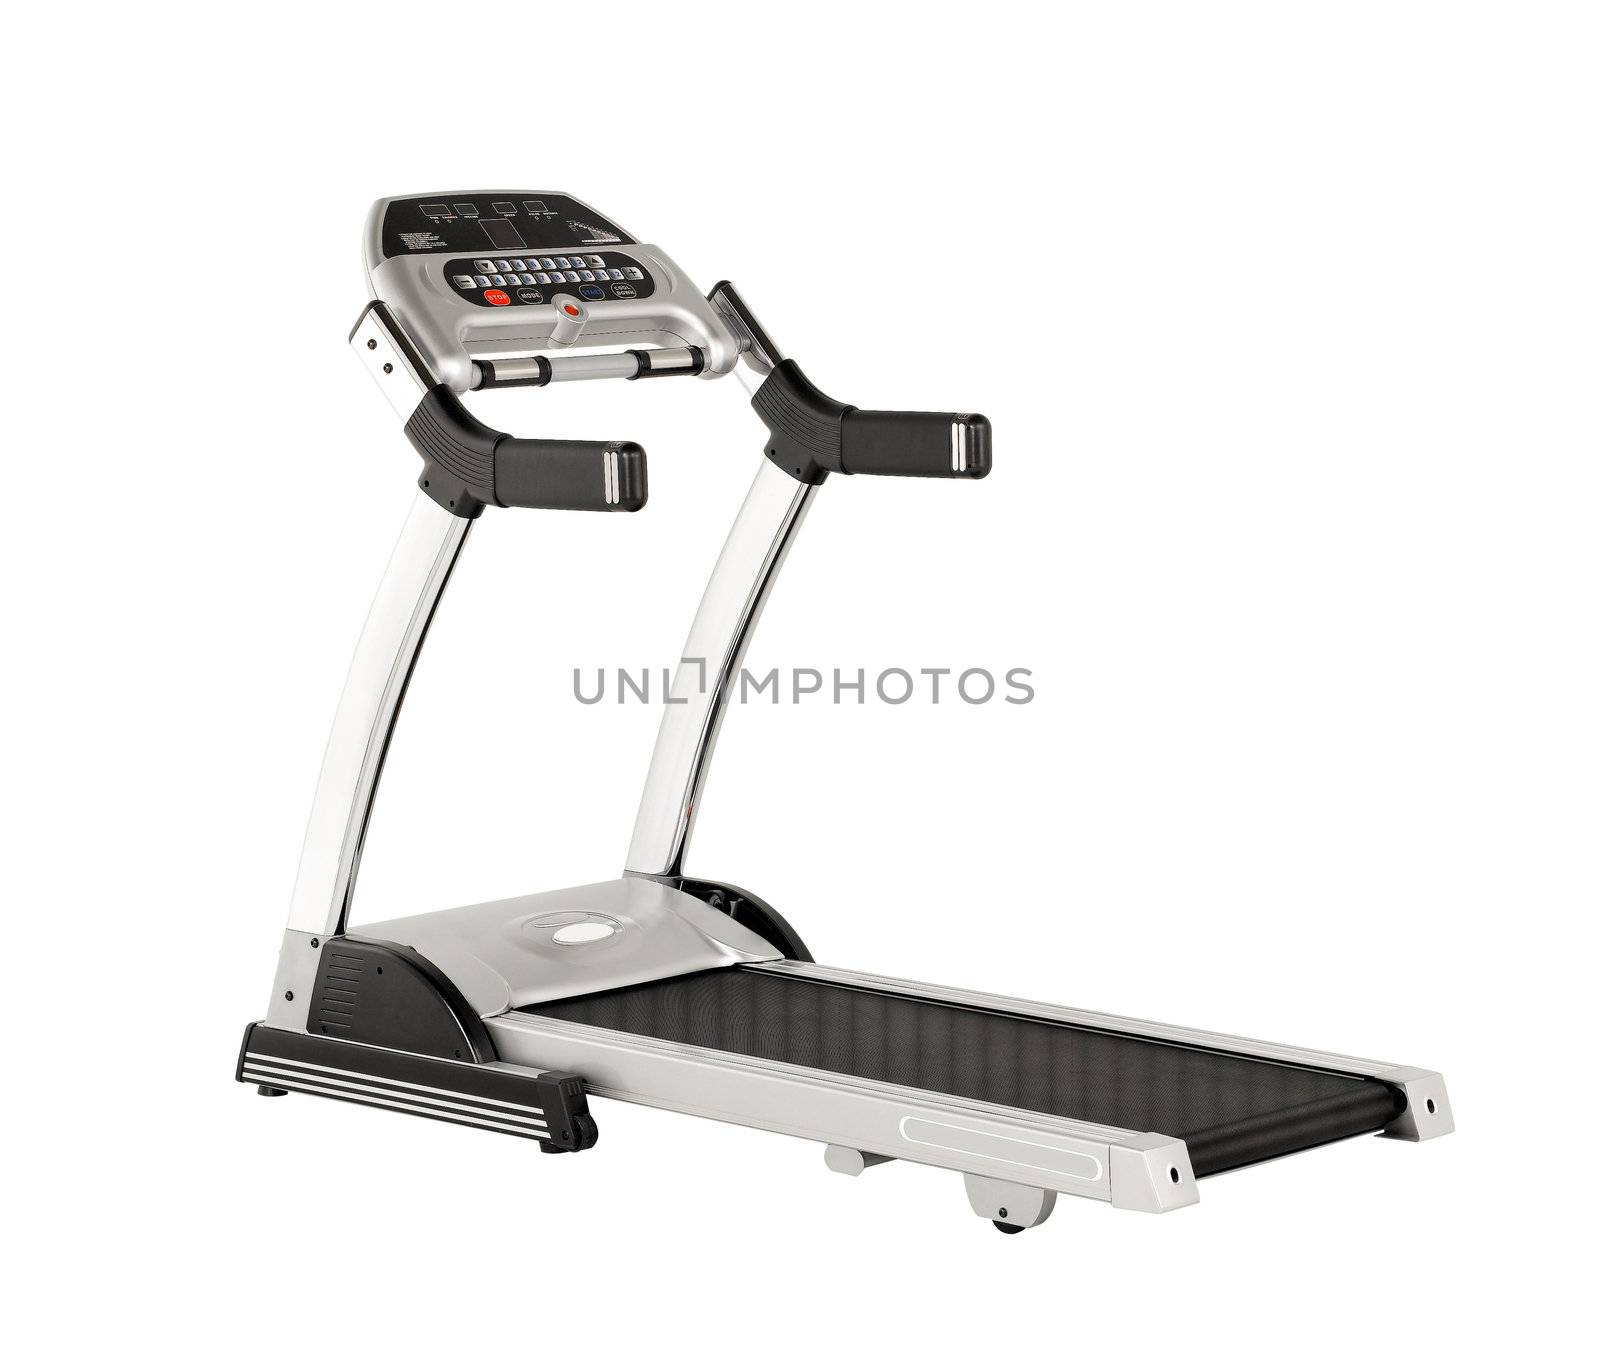 Treadmill the running walking exercise tool isolated on white